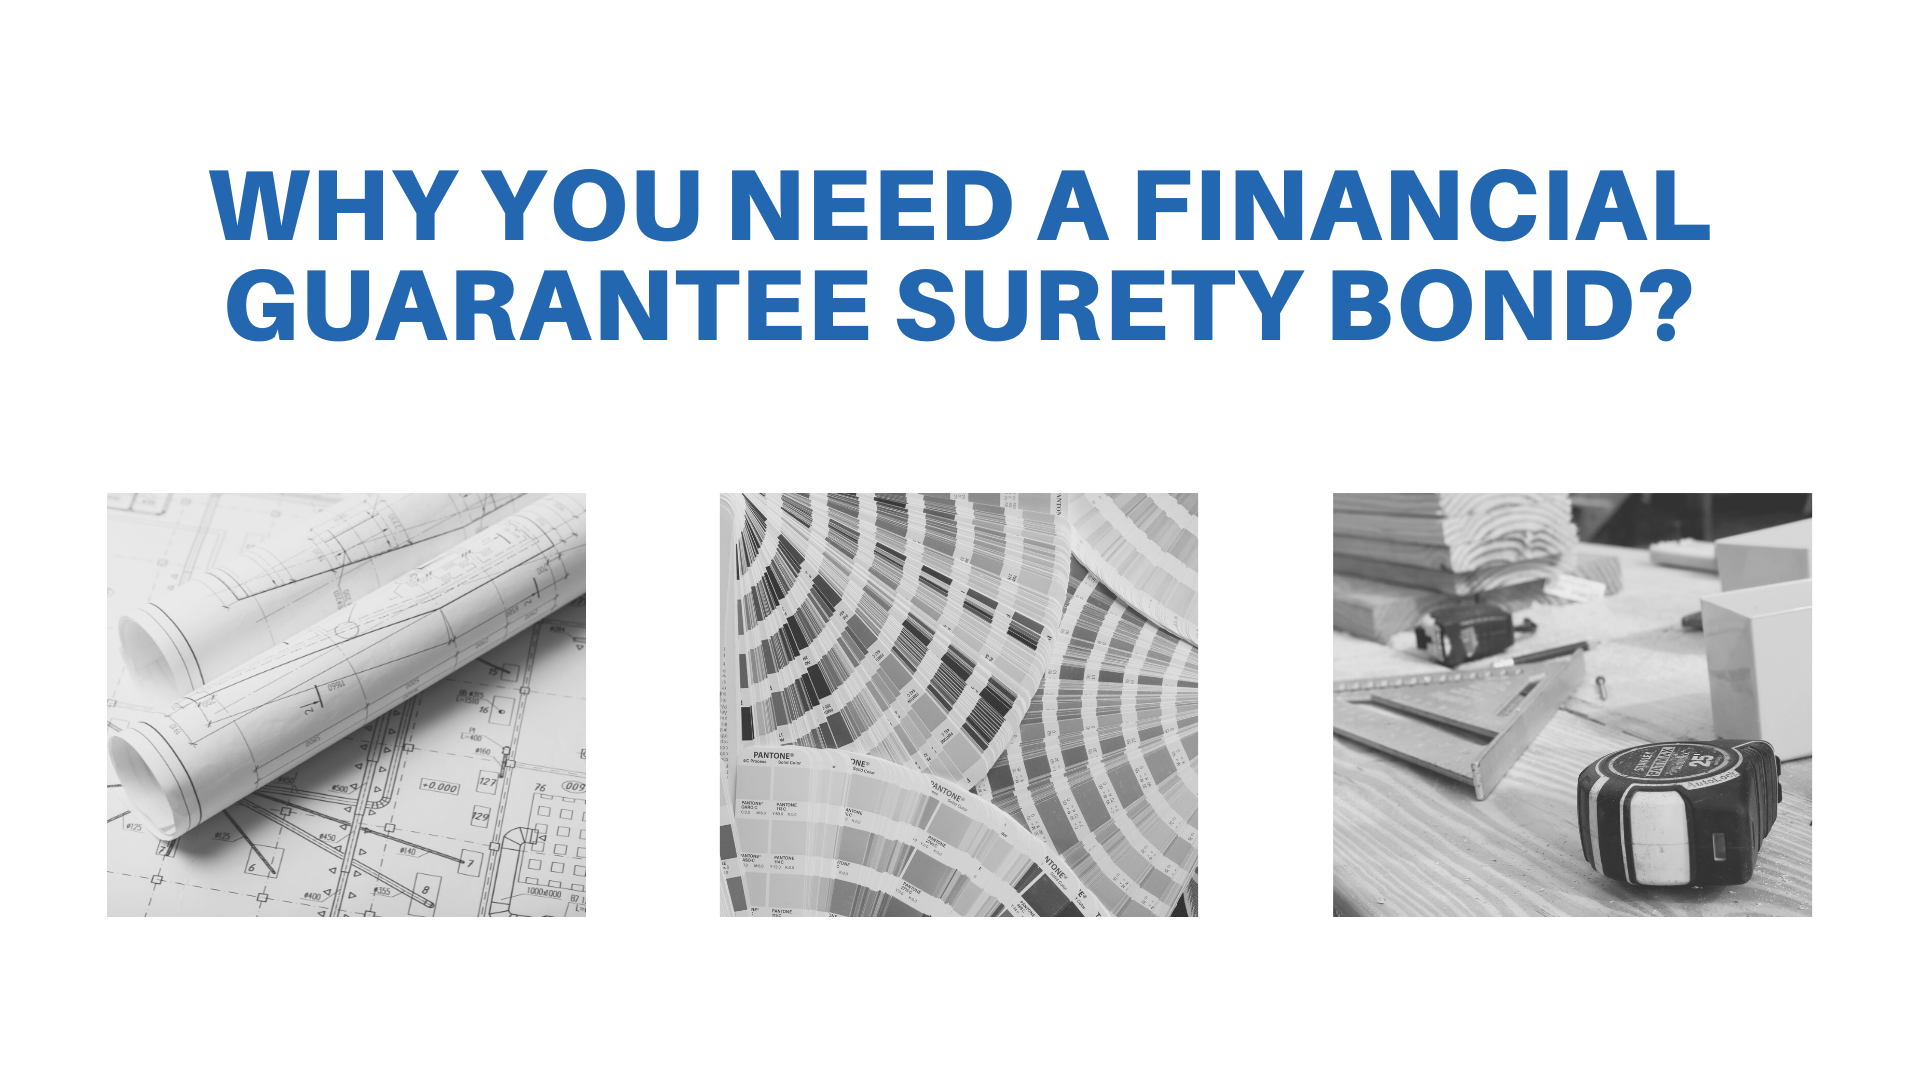 surety bond - What Should You Know About Financial Guarantee Surety Bond - building related photos